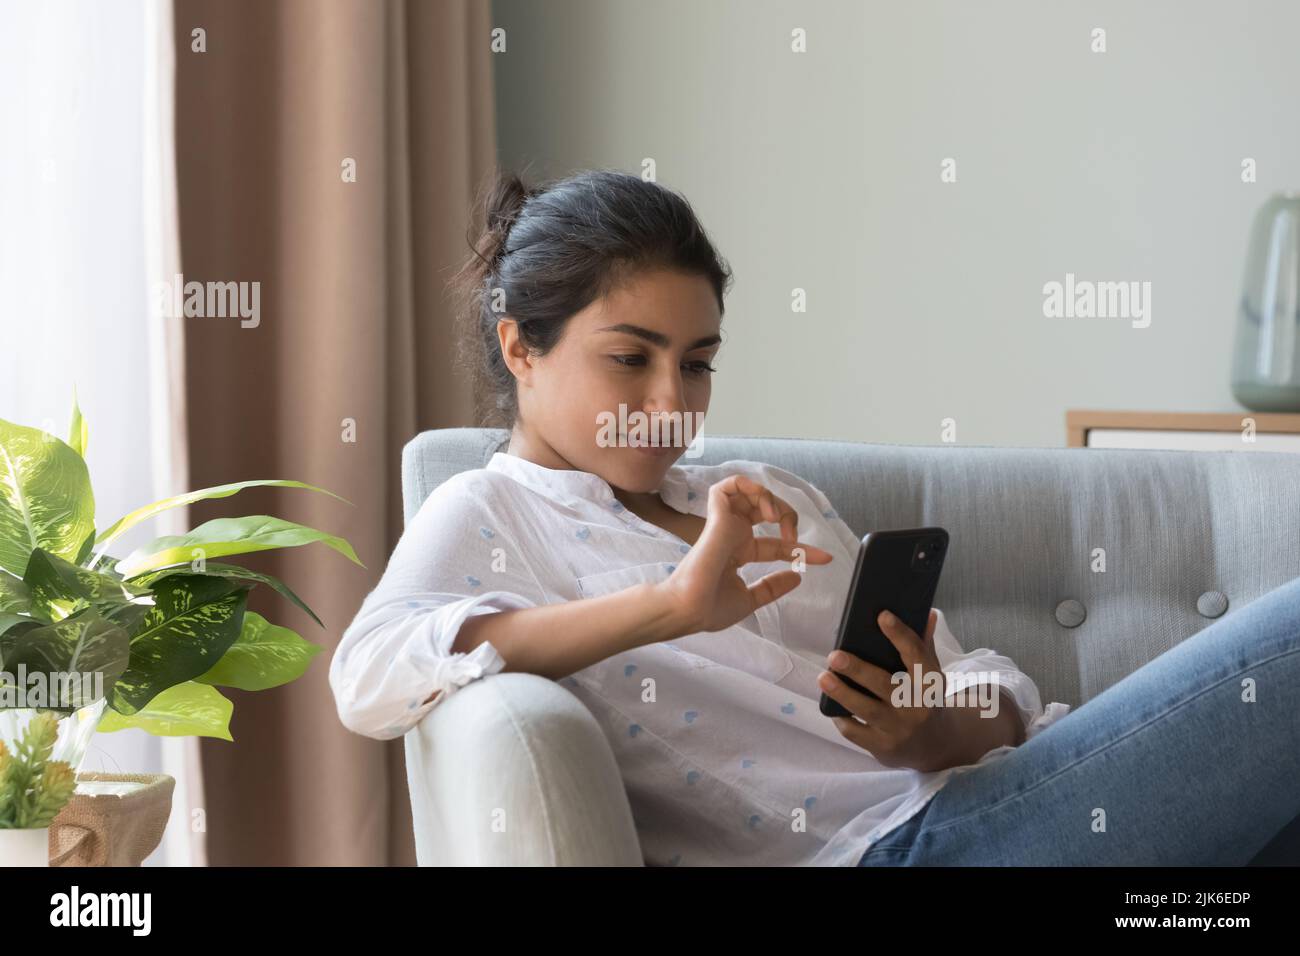 Thoughtful satisfied millennial Indian girl using online shopping app Stock Photo